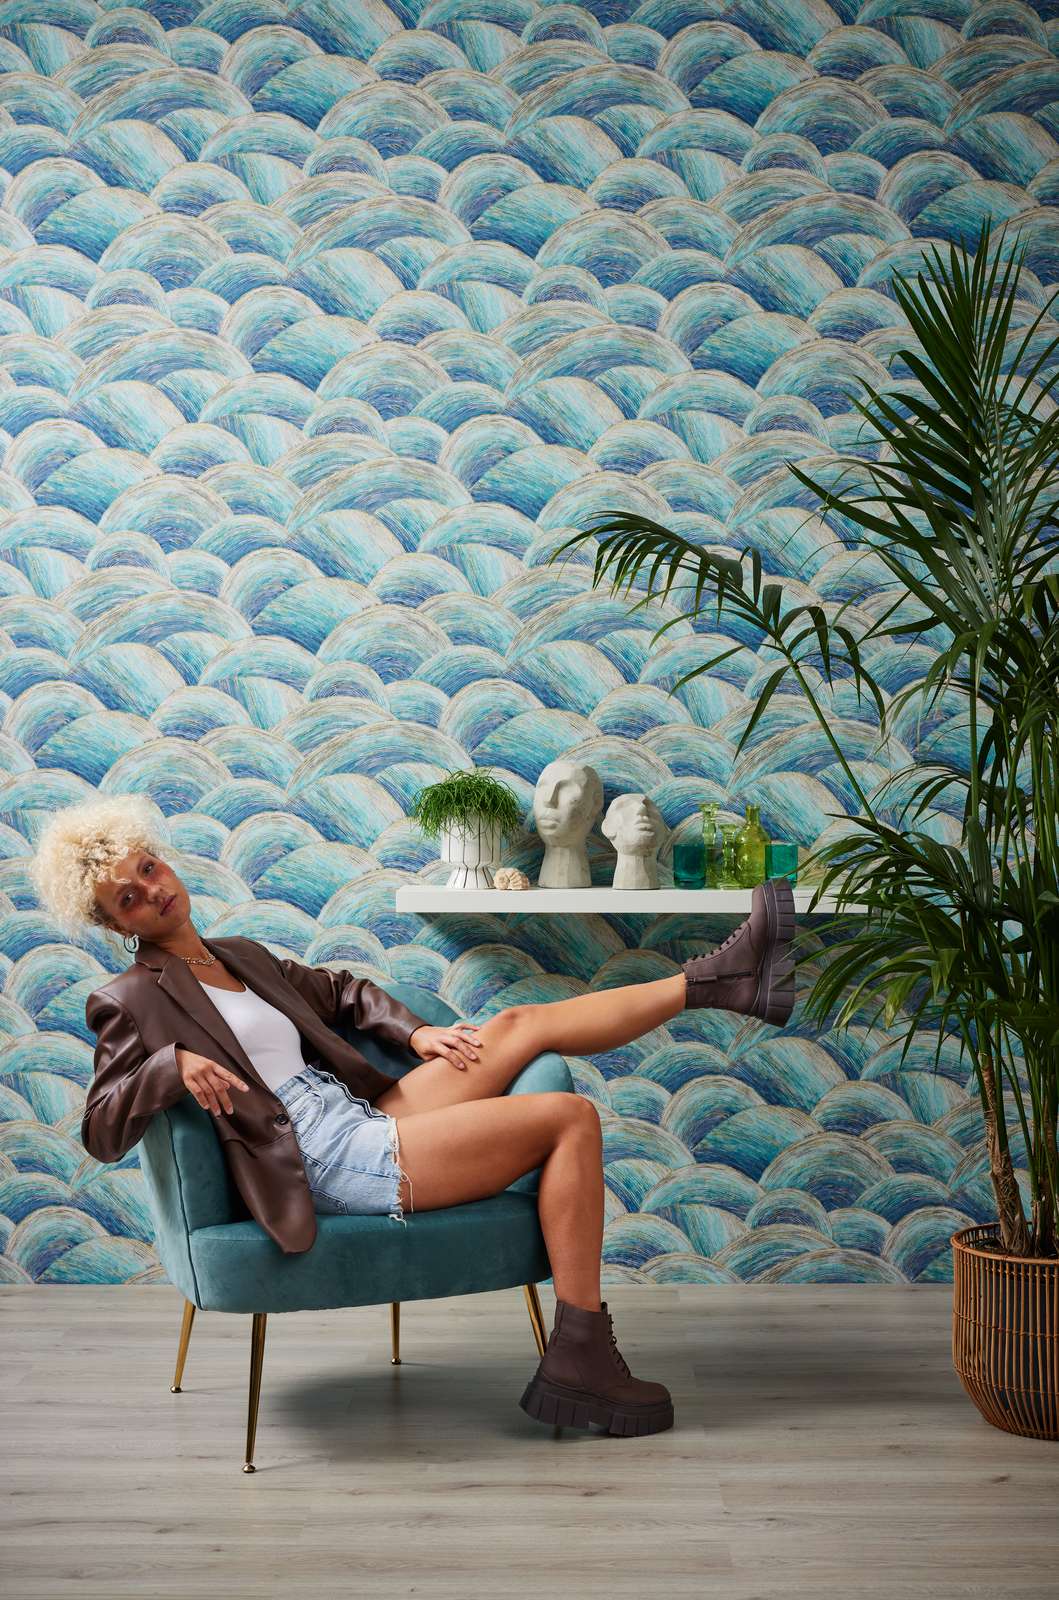             Abstract non-woven wallpaper with wave pattern & gloss effect - blue, turquoise, gold
        